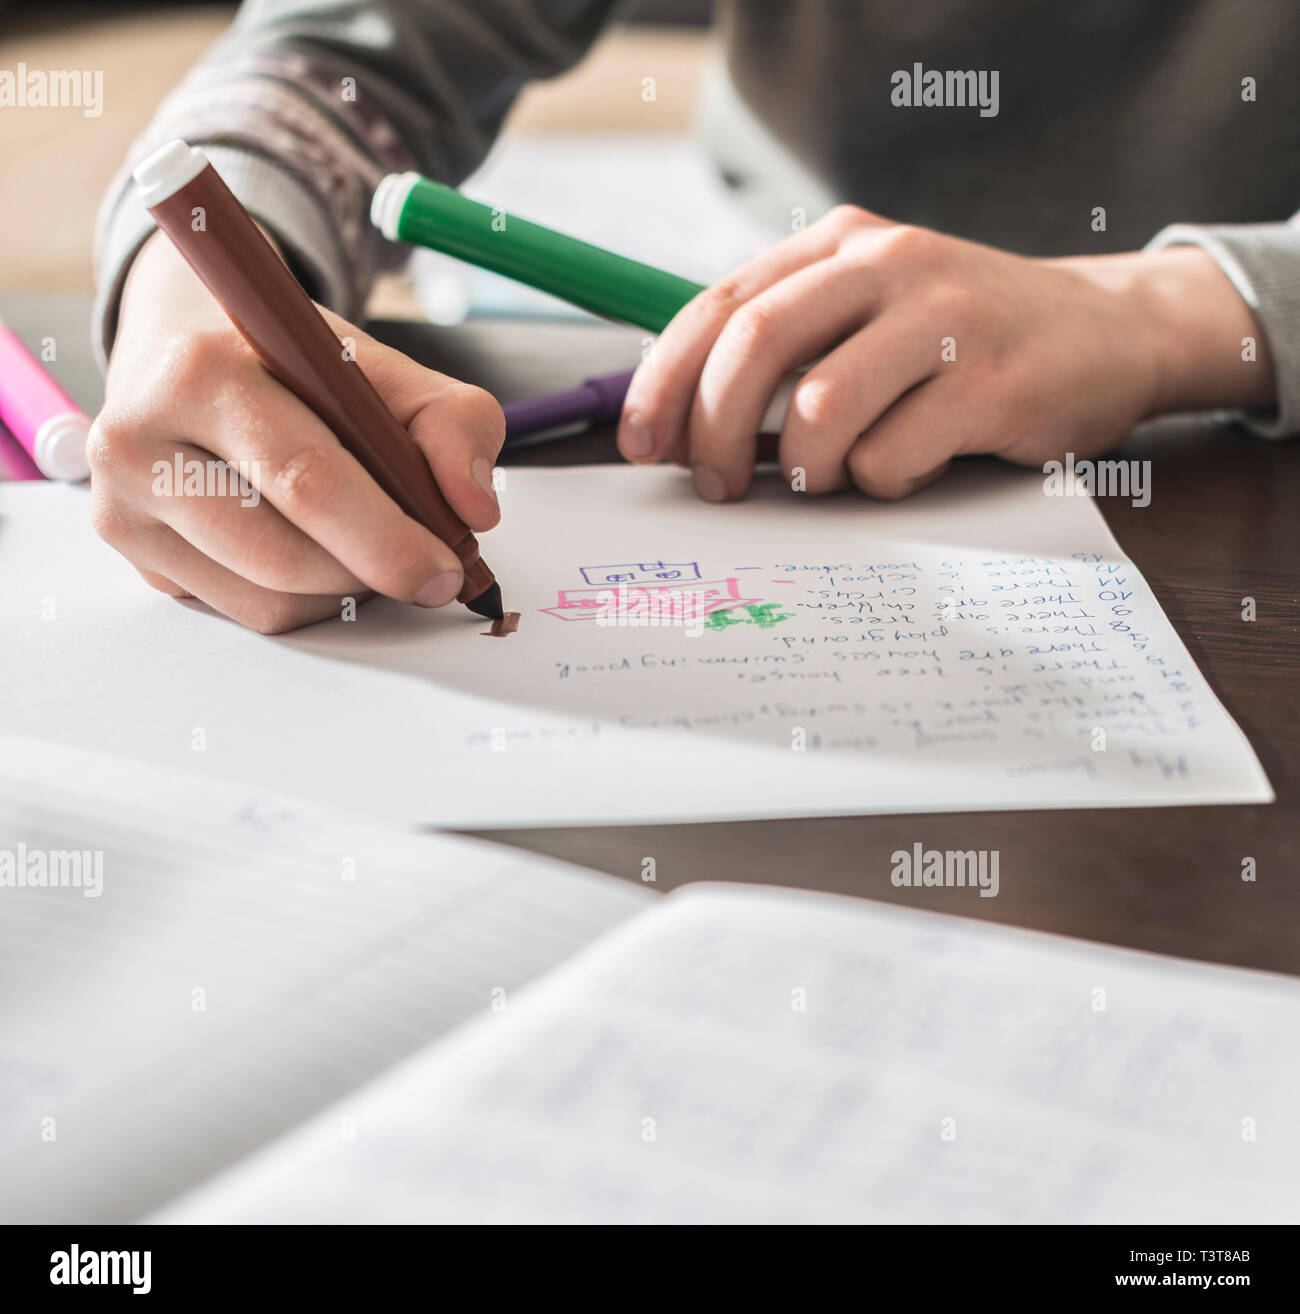 Caucasian boy drawing on paper Stock Photo